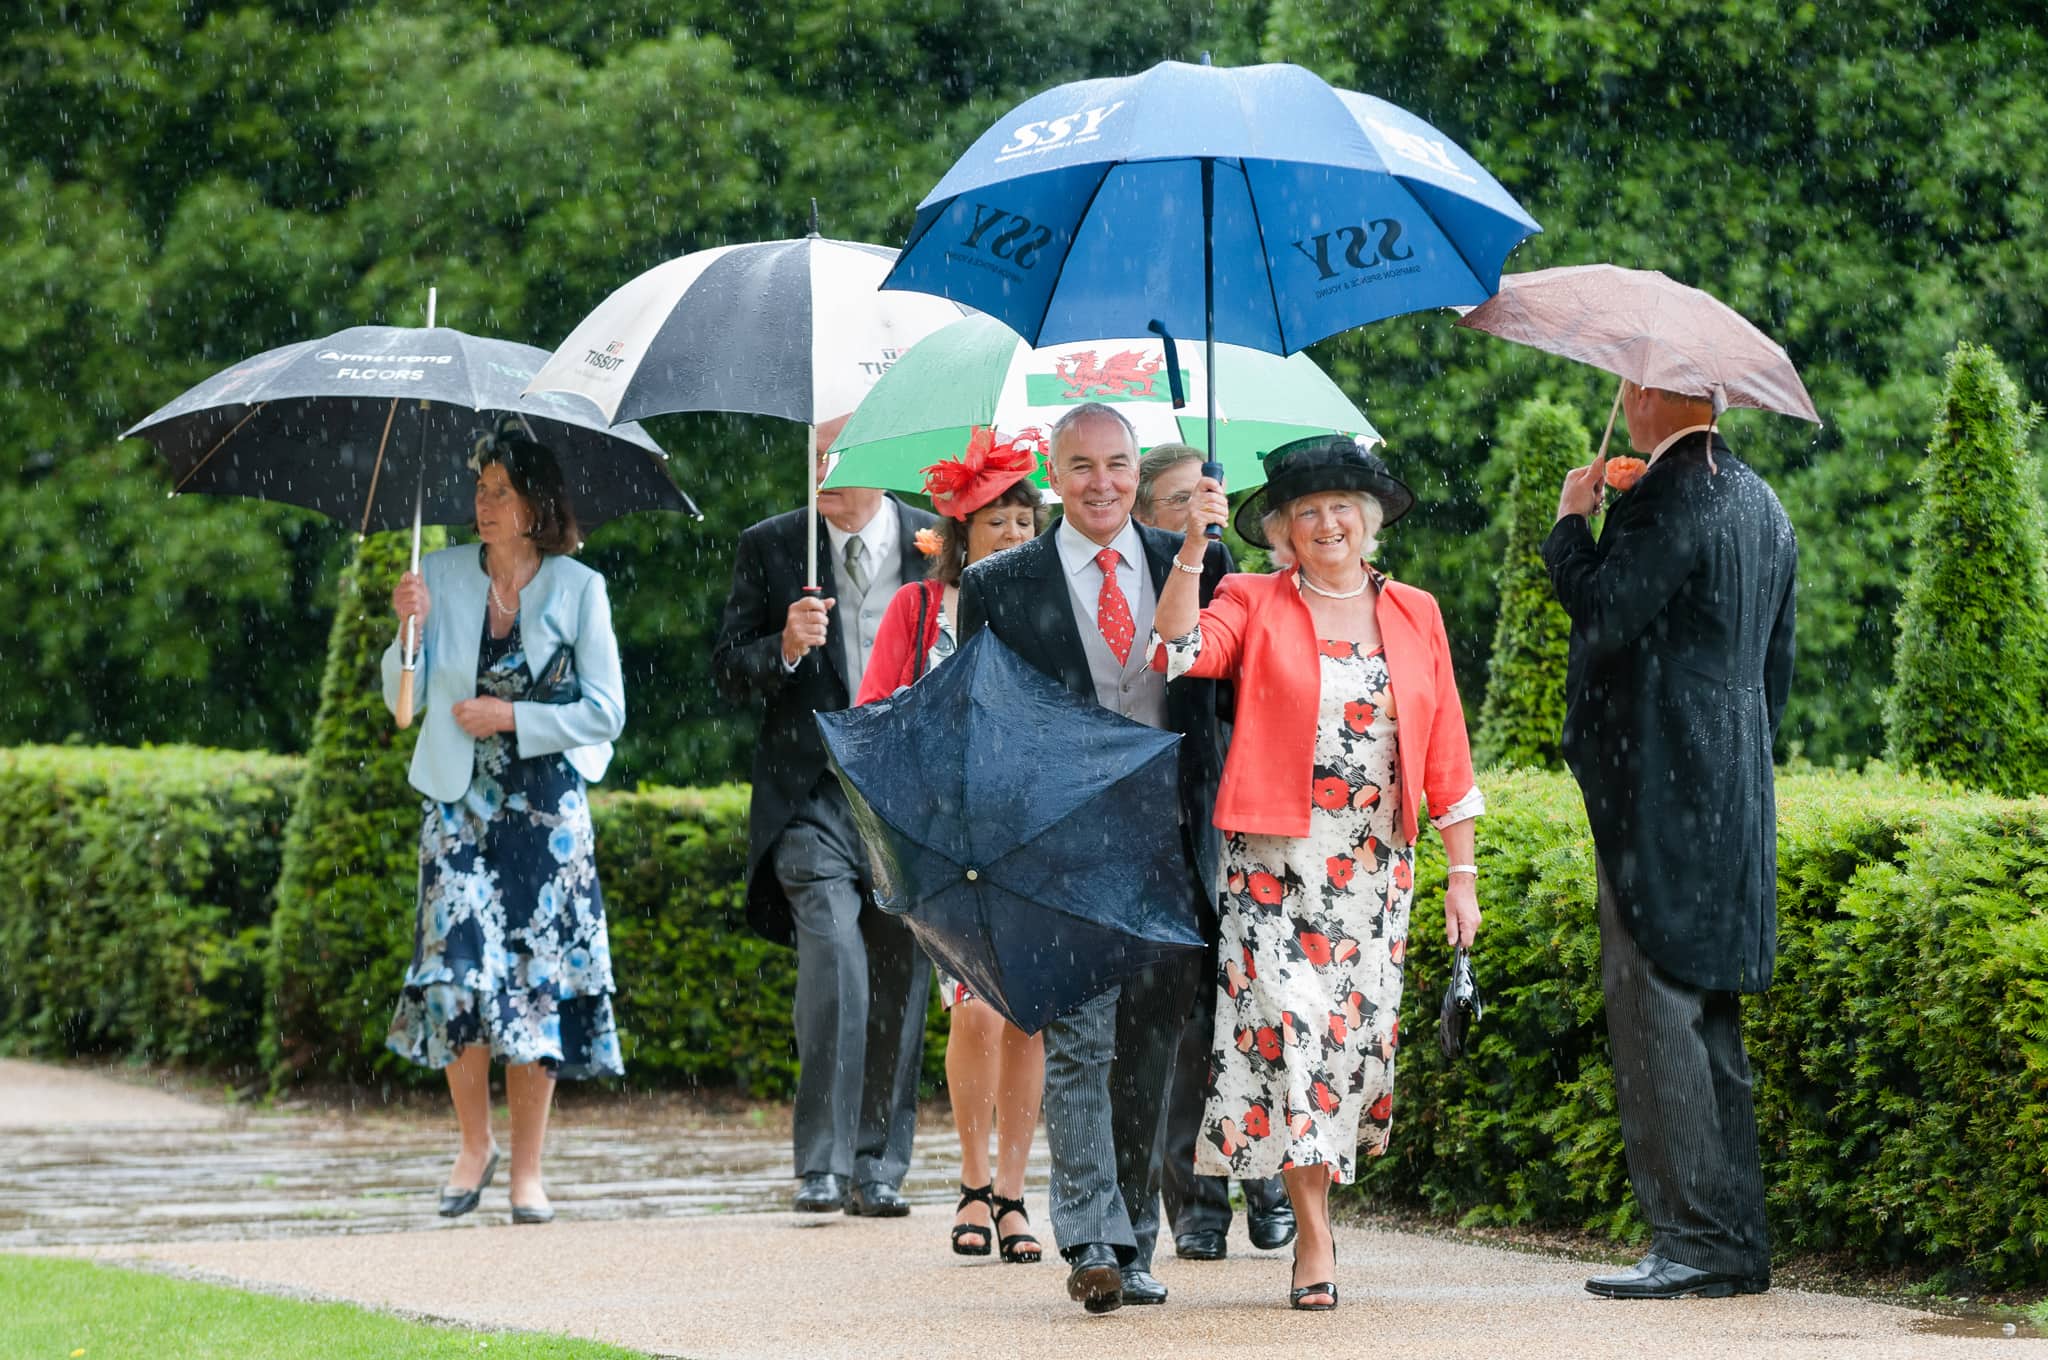 Wedding guests arriving at church in the rain